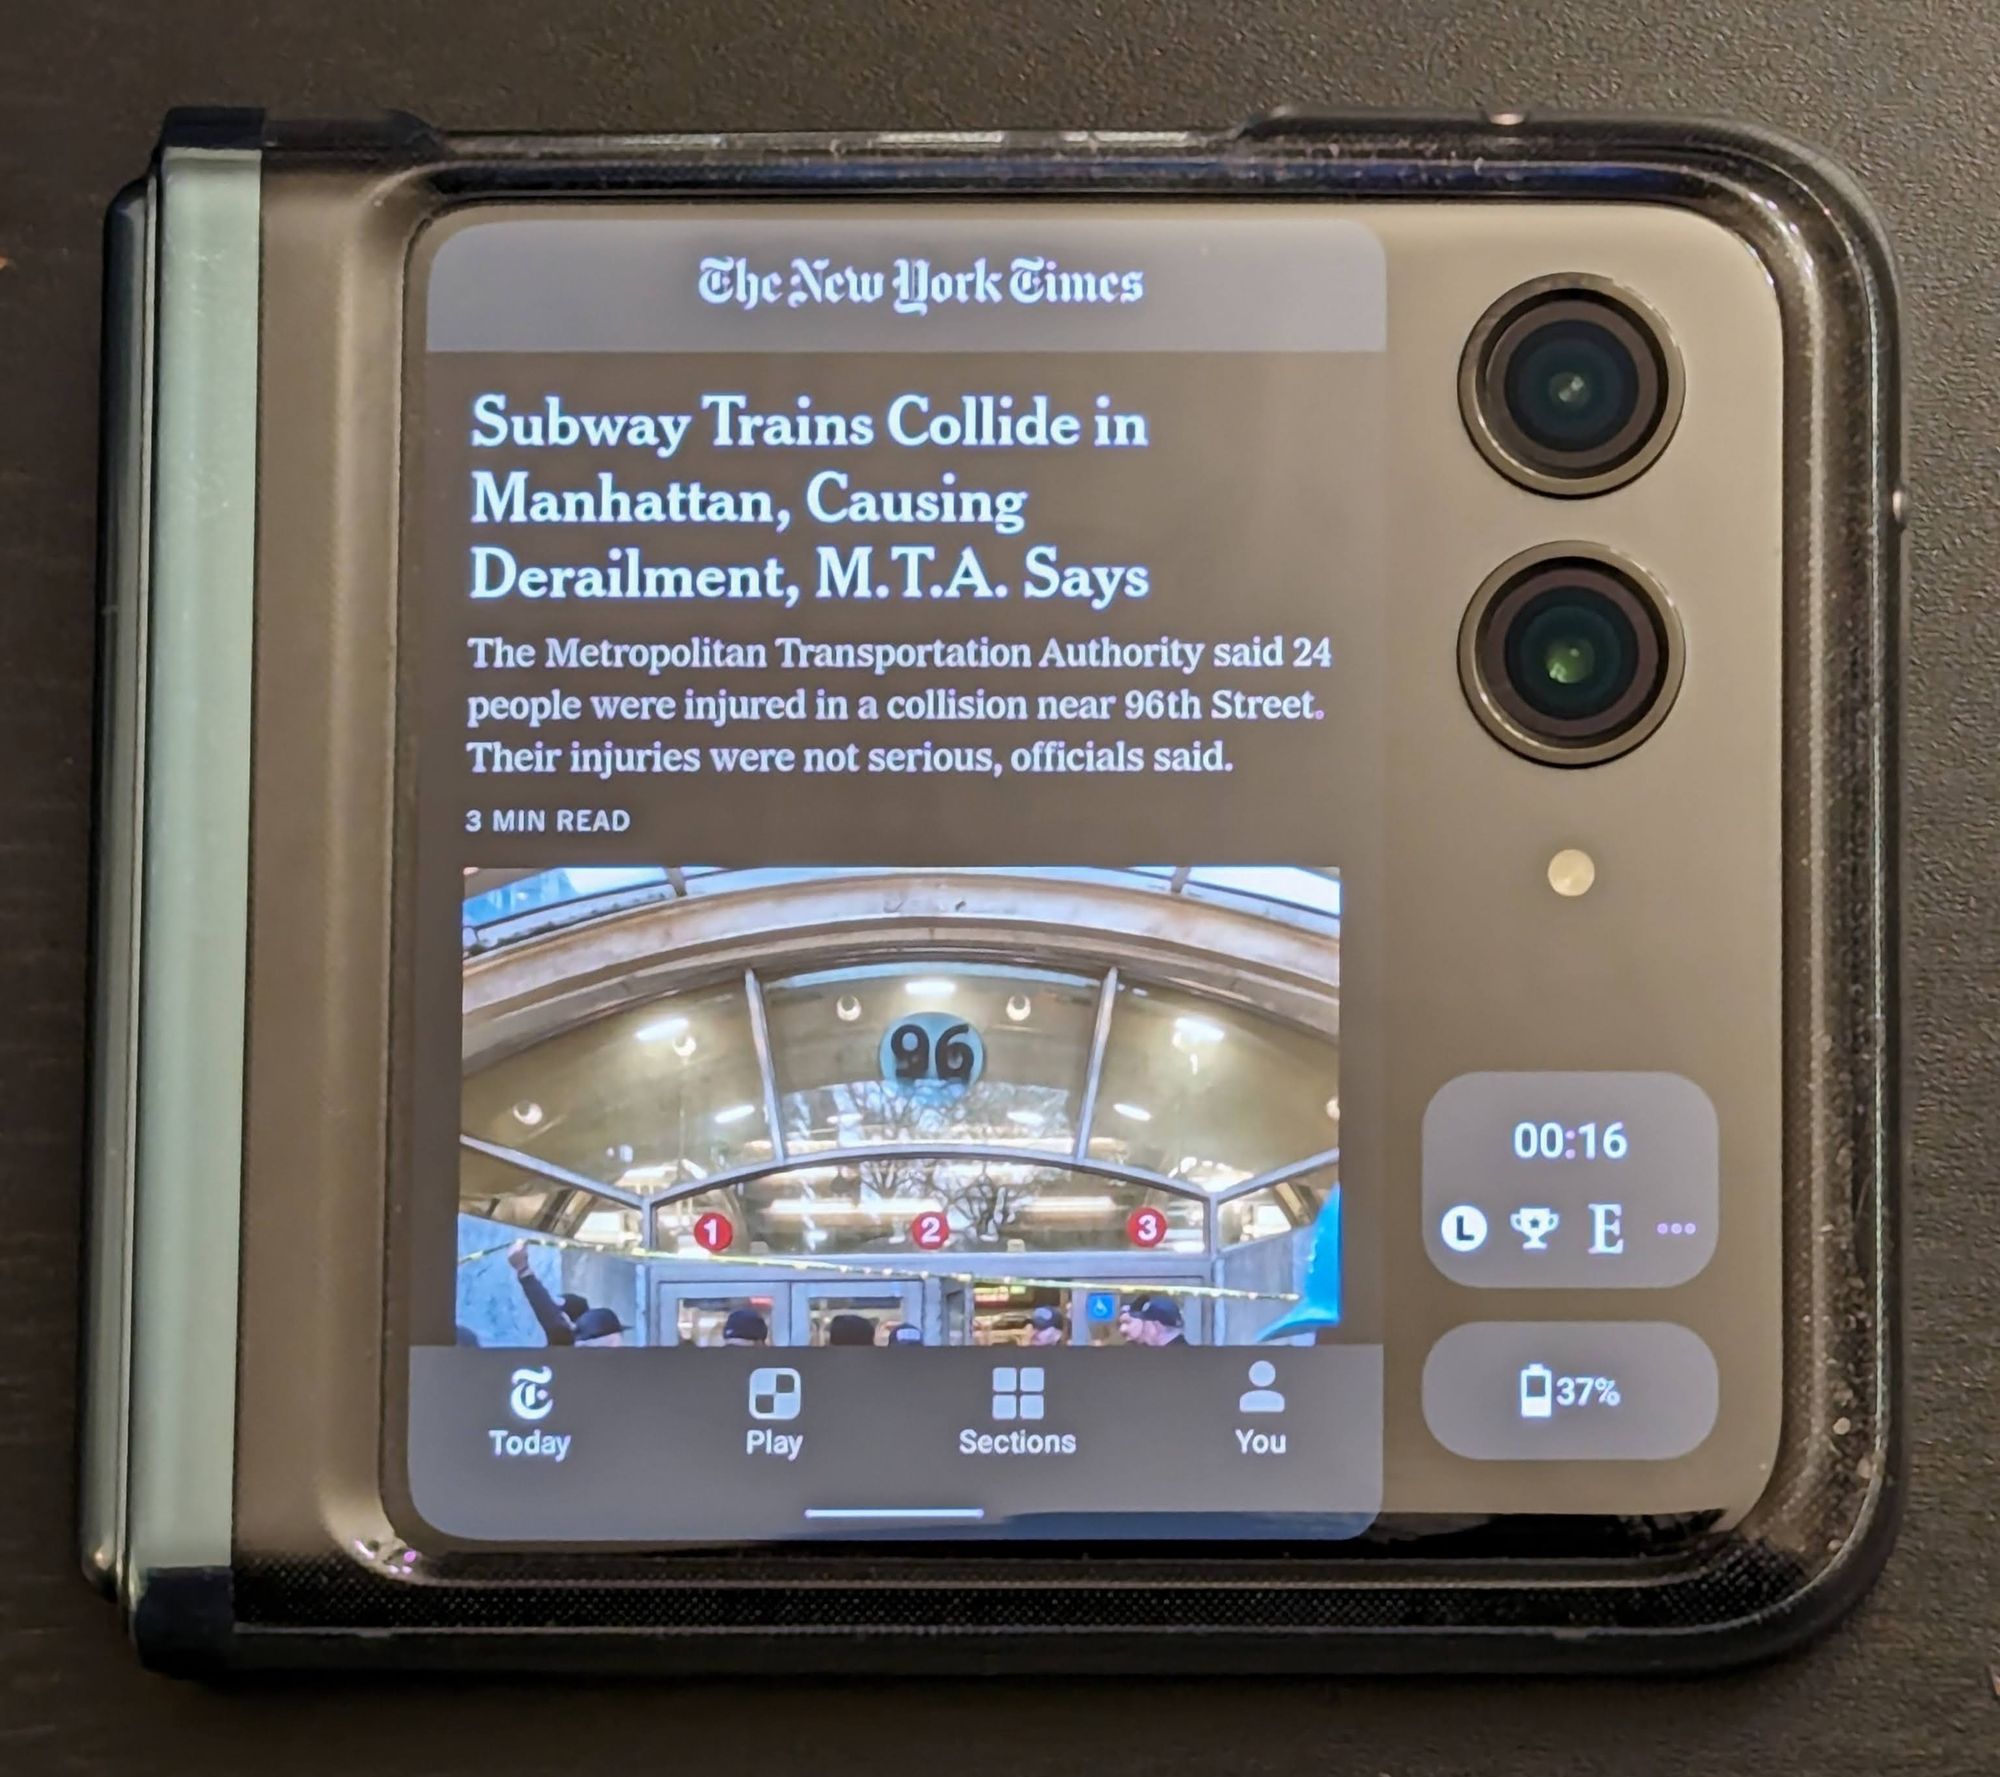 The Razr Plus in a "landscape" orientation while folded, showing the New York Times app taking up the full height of the screen but only covering the width of the screen up to the cameras. Two small widgets appear underneath the cameras (basically the cameras and those widgets essentially appear as a second column besides the open app)